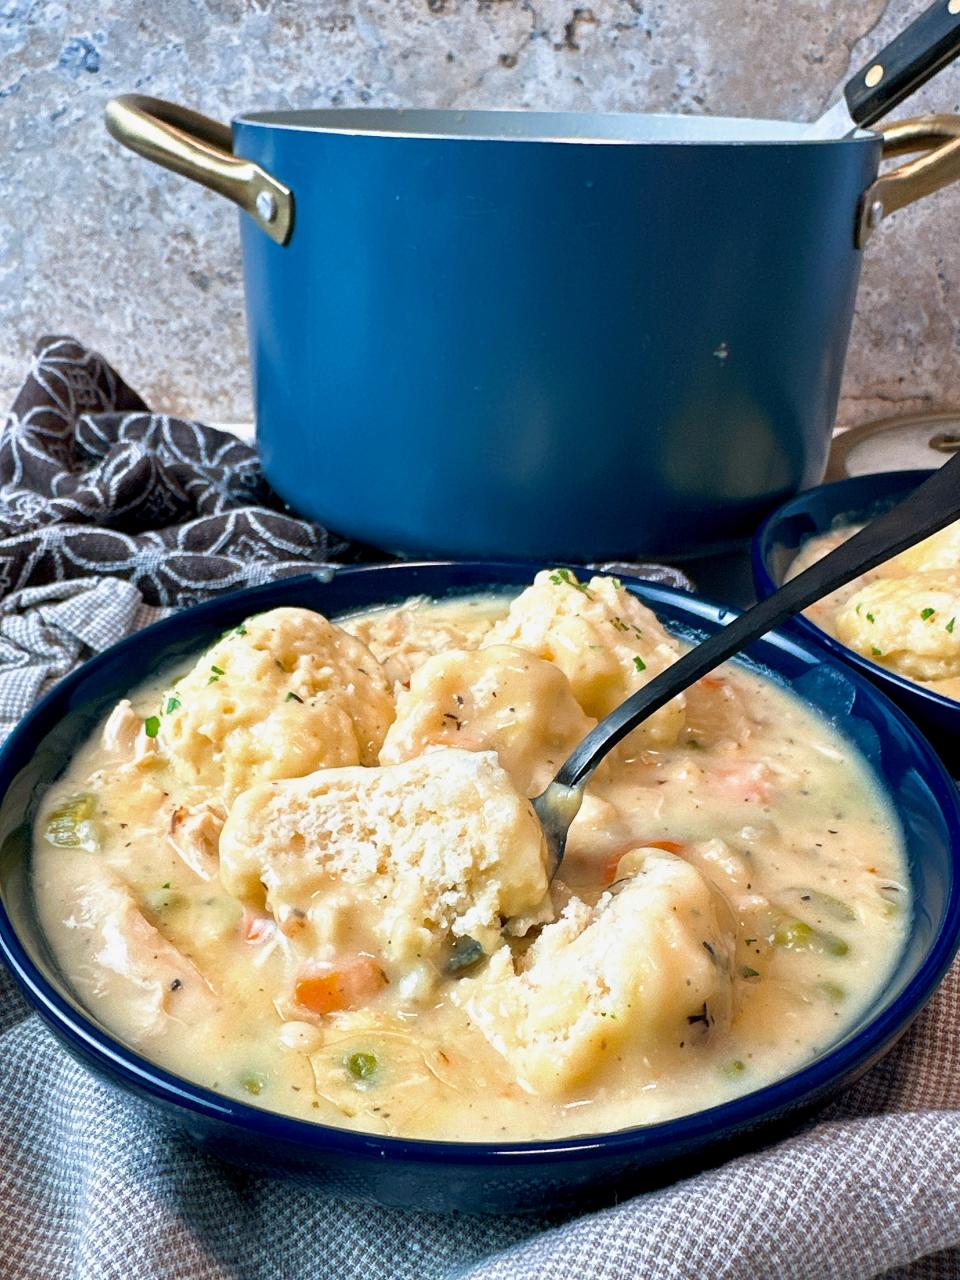 Making chicken and dumplings from scratch is easier than you think.